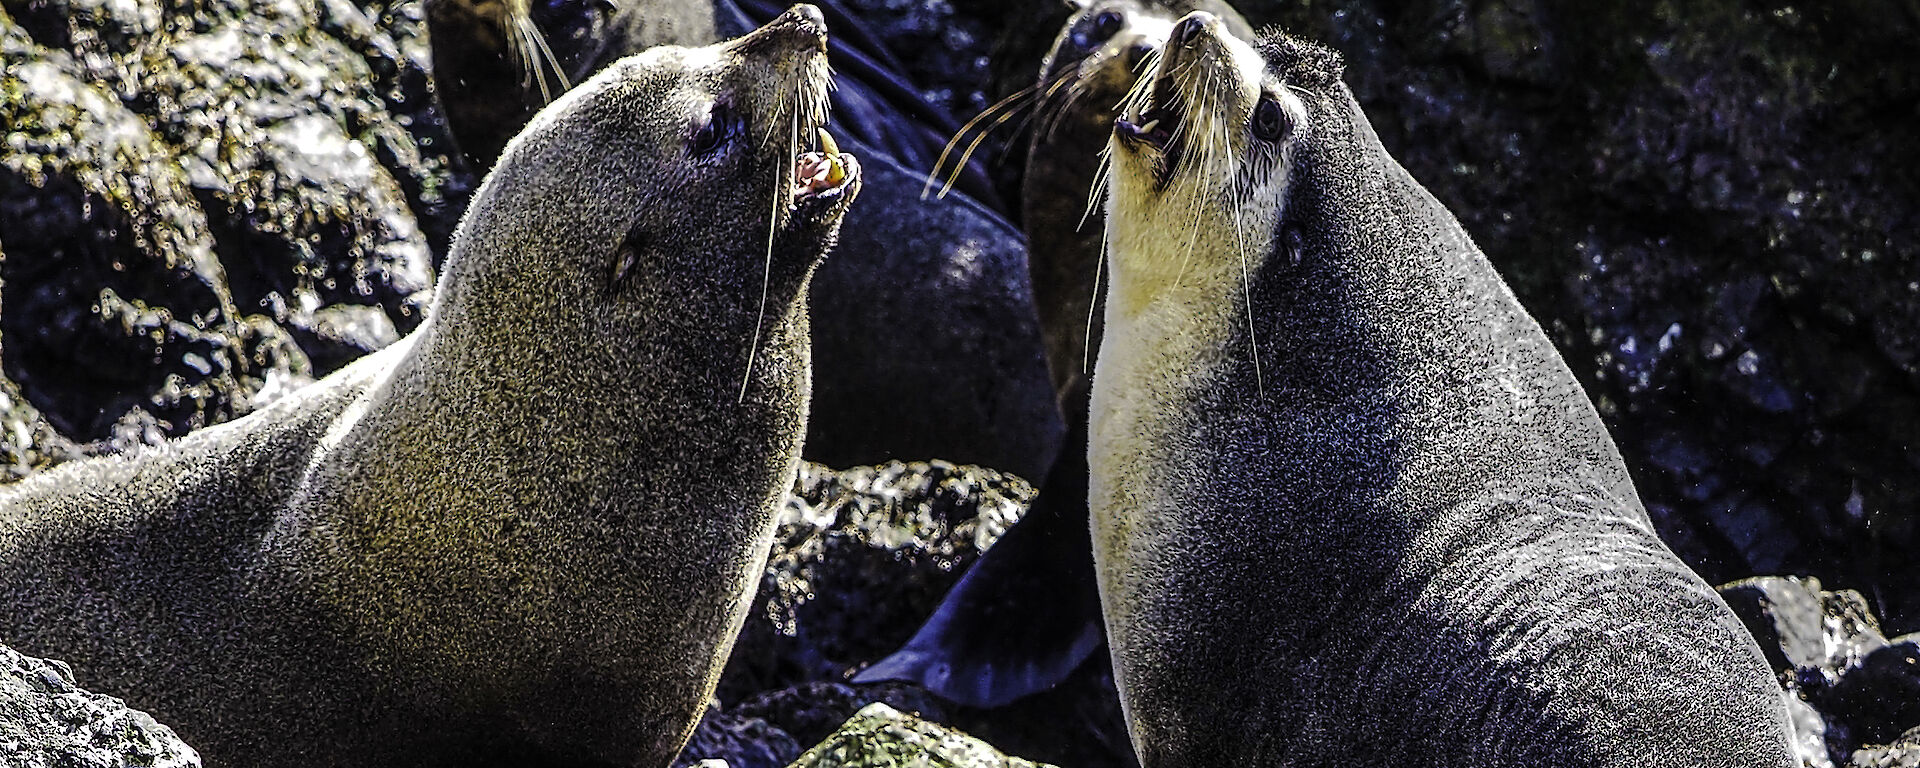 A group of fur seals on the rocks.  Two large males at the centre of the image.